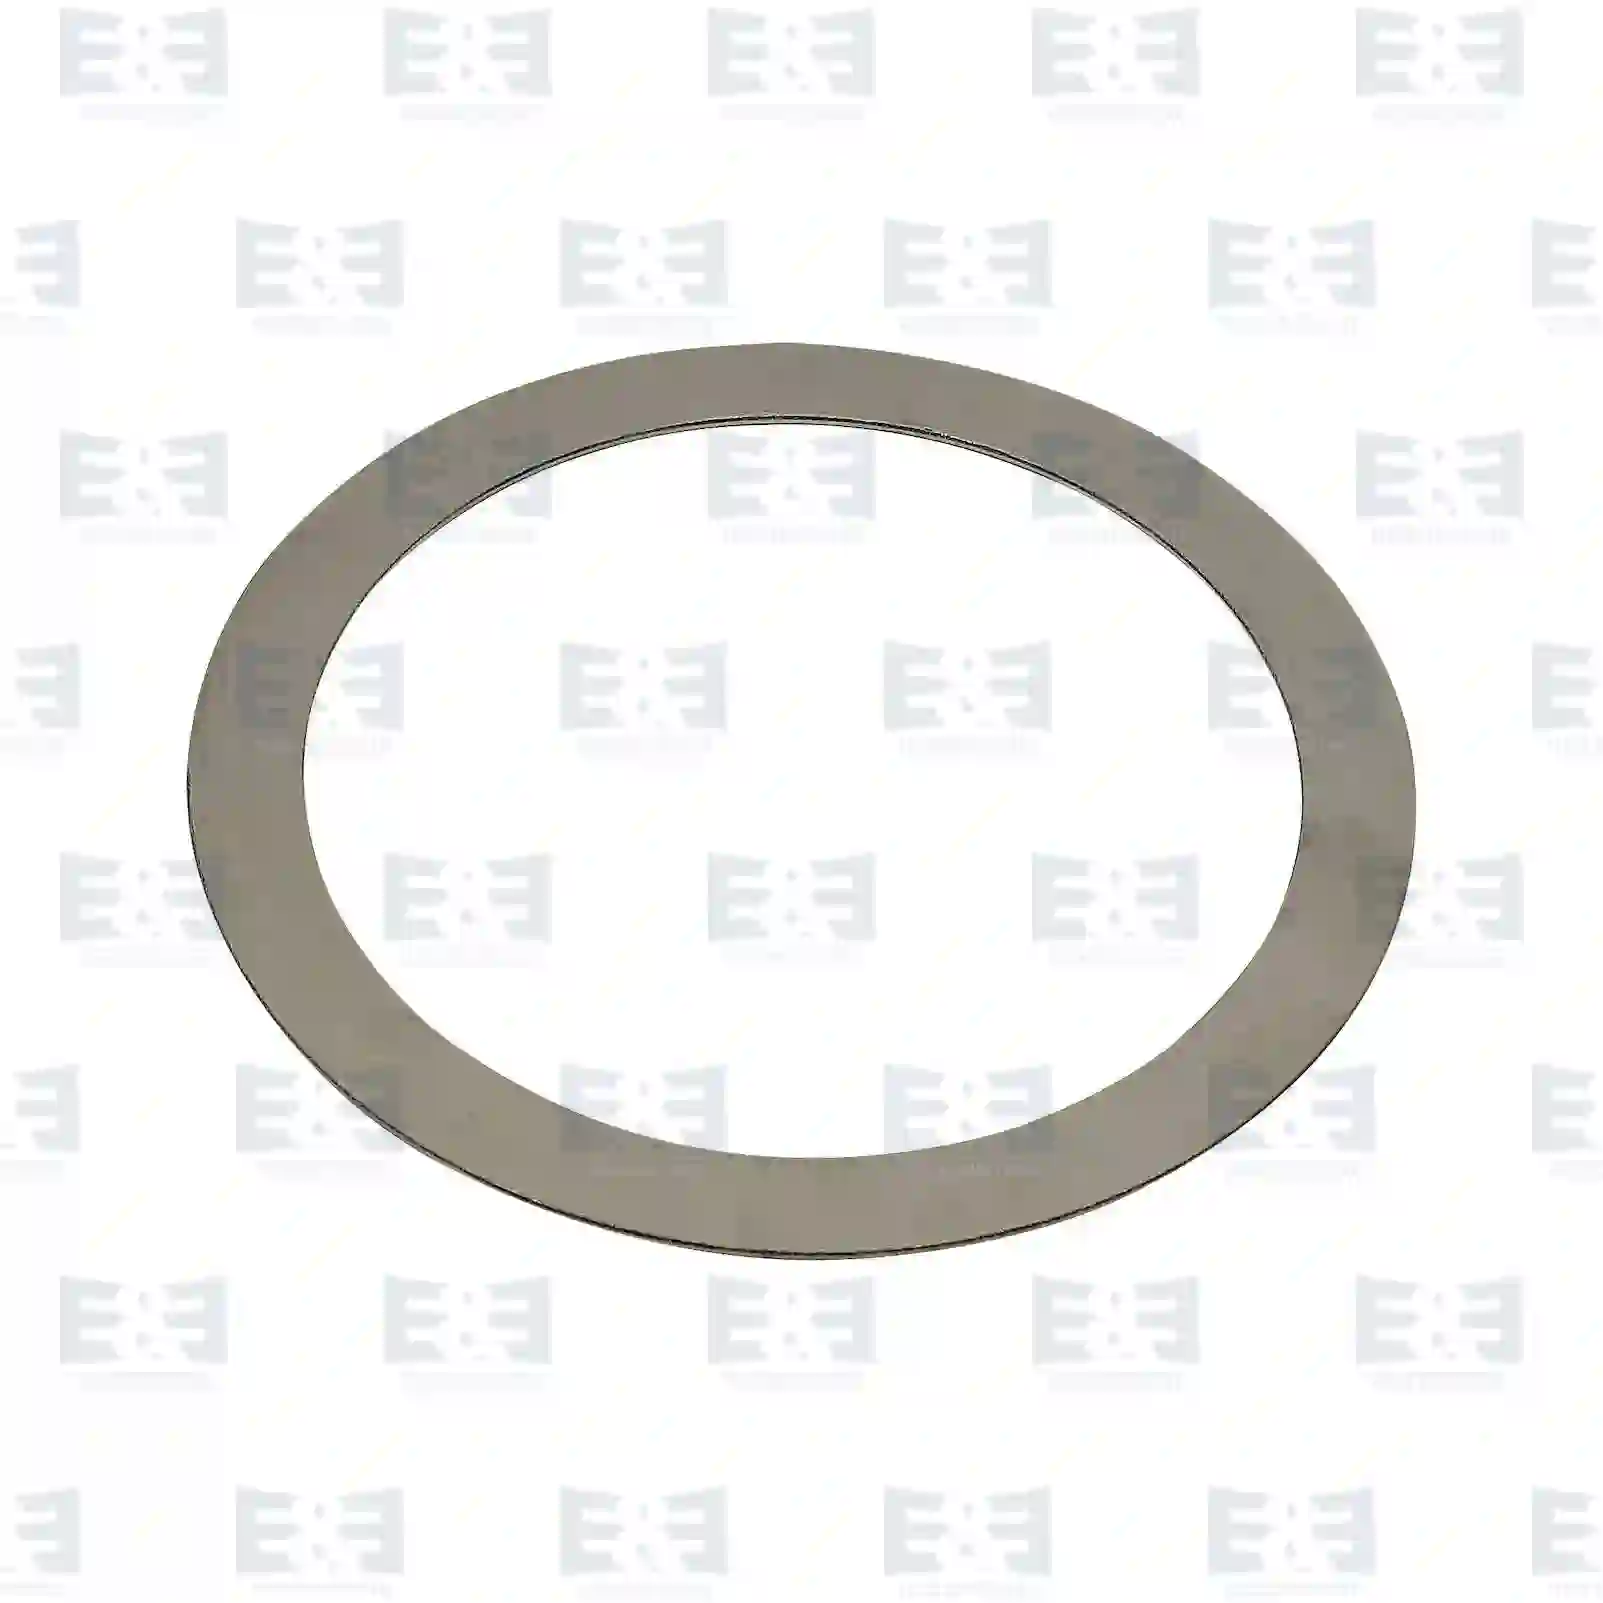 Rear Axle Housing Wear ring, EE No 2E2279968 ,  oem no:2129871 E&E Truck Spare Parts | Truck Spare Parts, Auotomotive Spare Parts